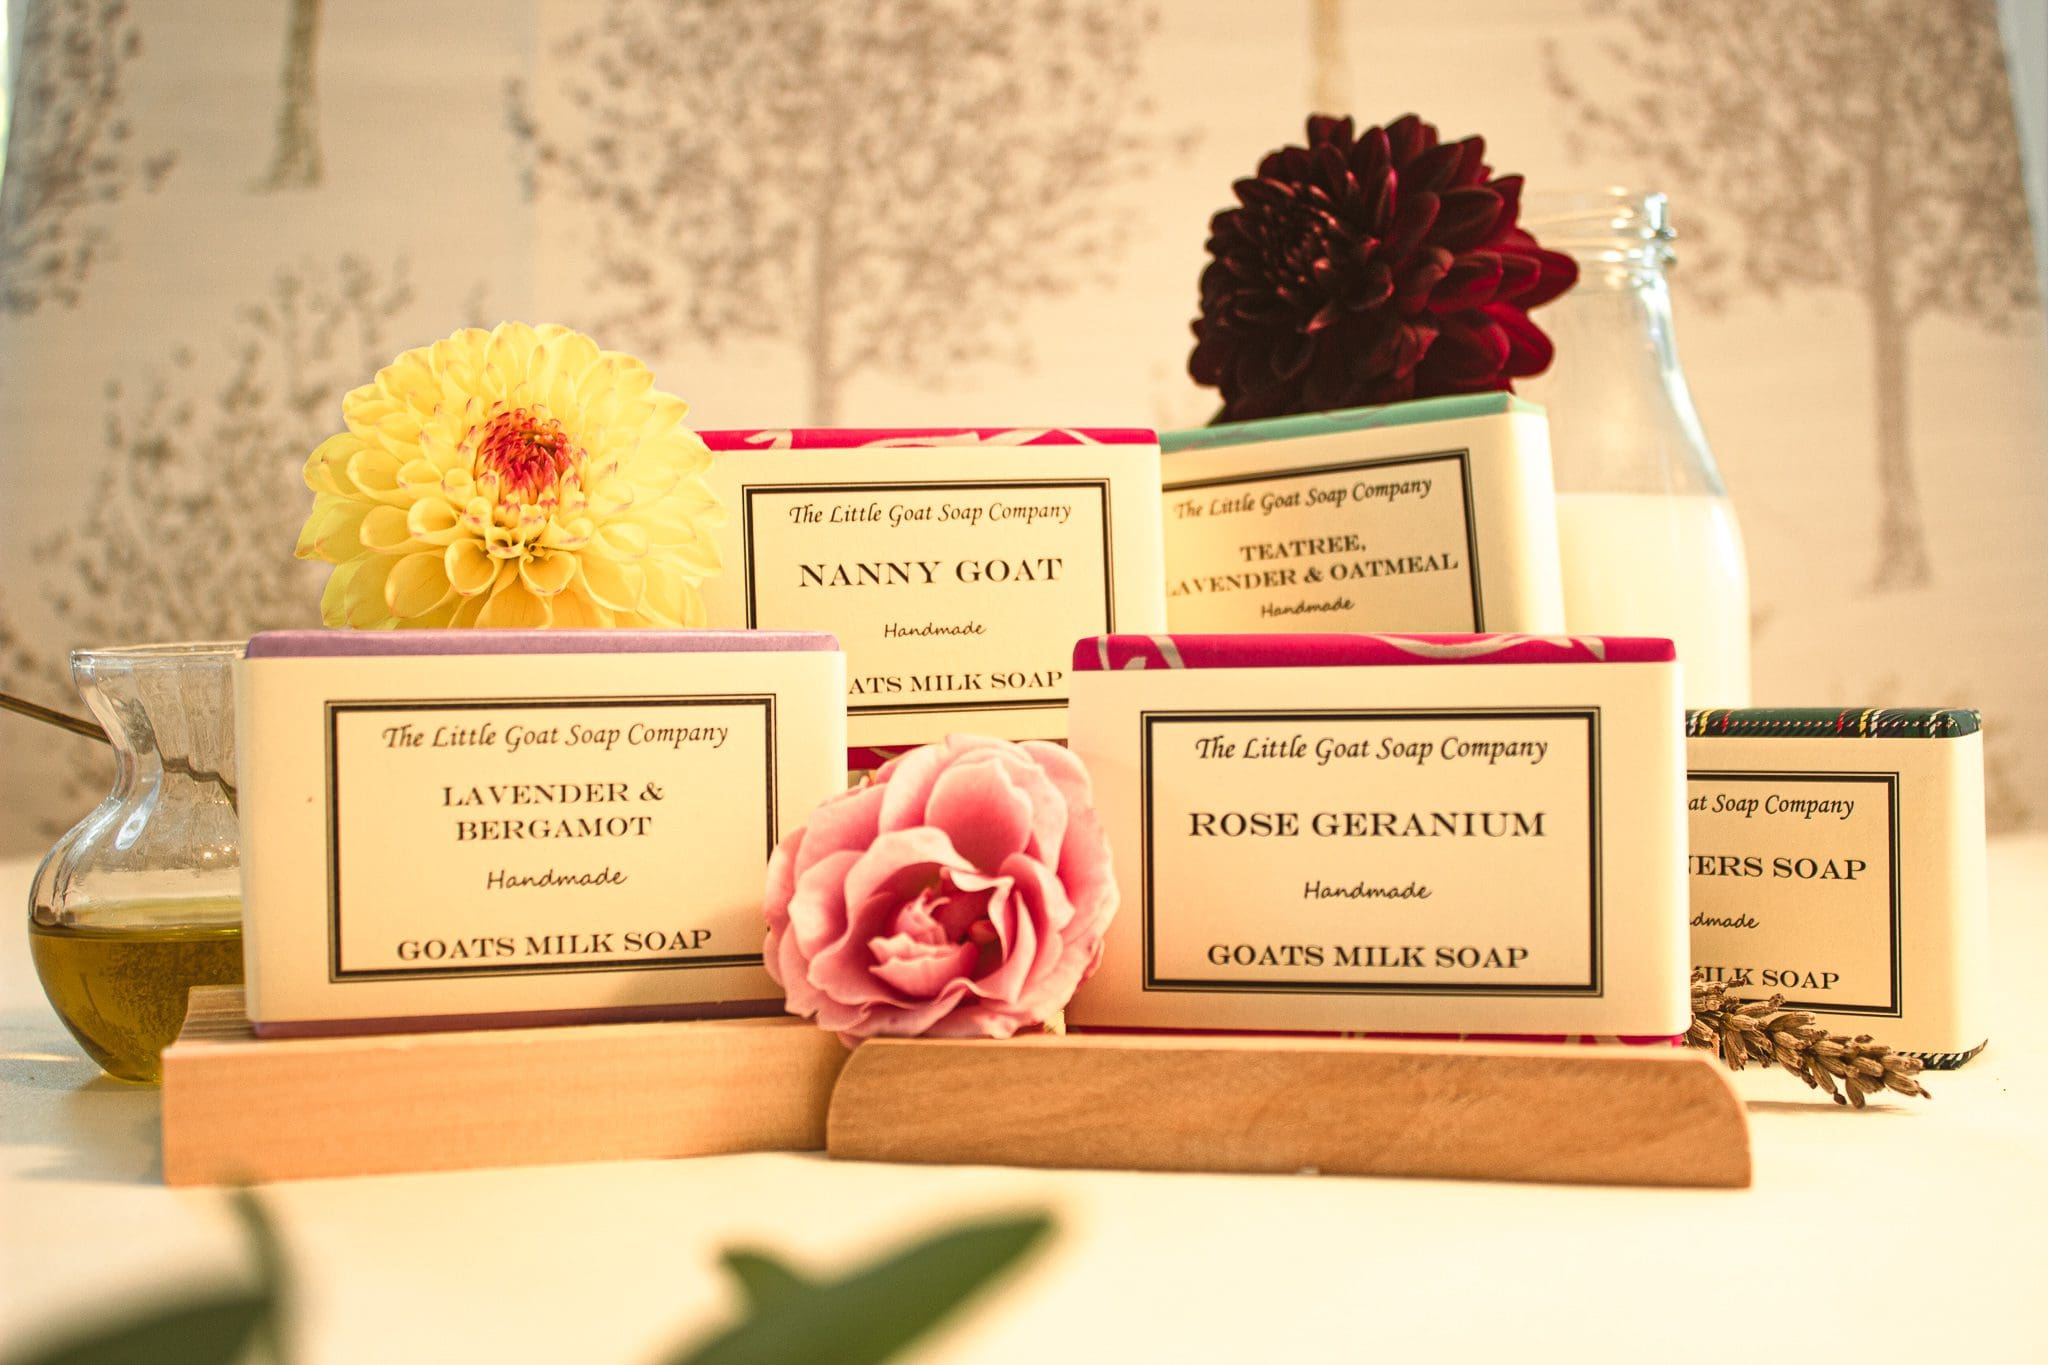 large range of soaps from the little goat soap company, set dressed with a bottle of goats milk, yellow and red flowers. The soaps are arranged on soap racks.